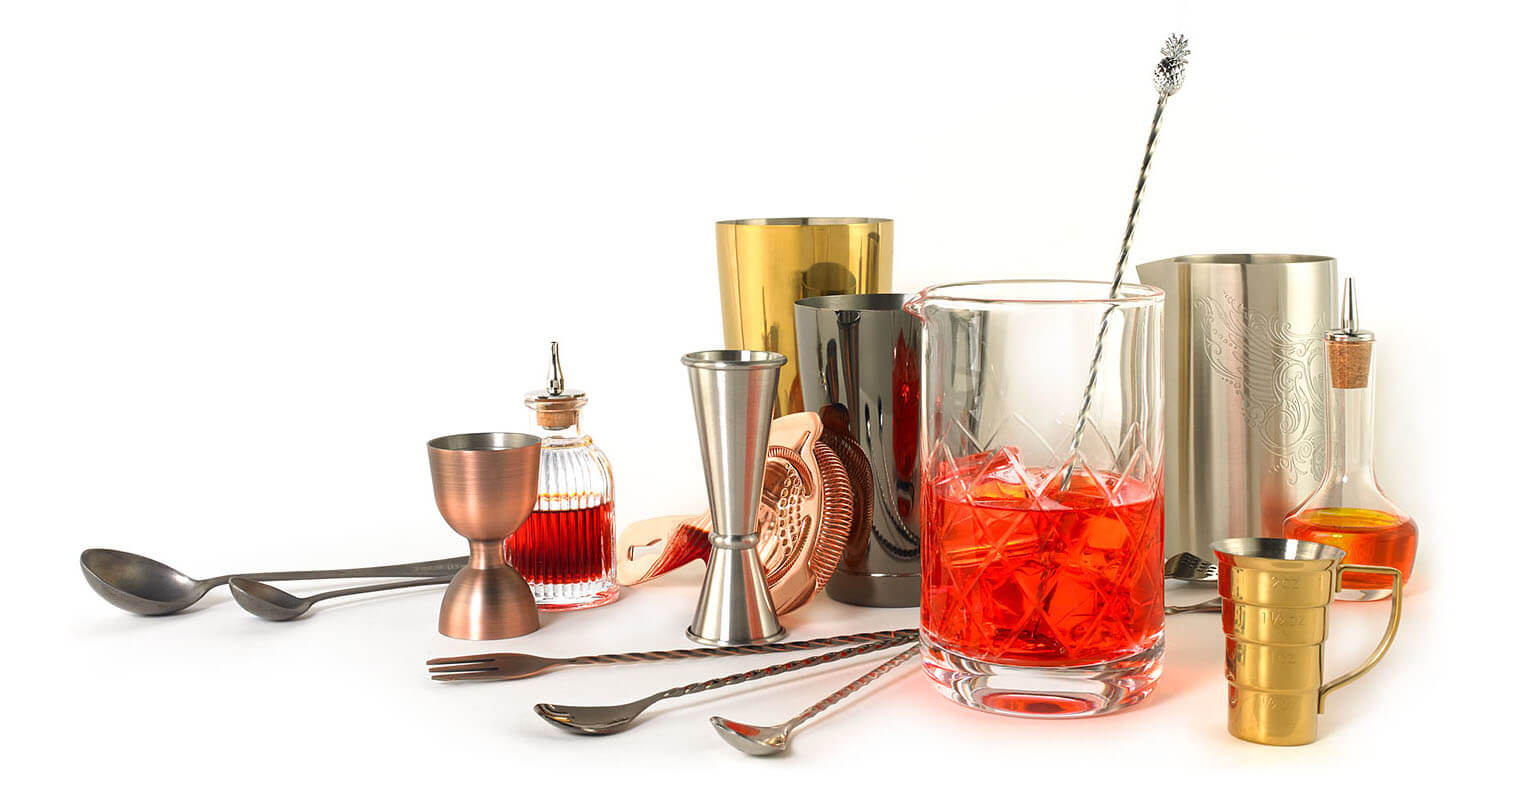 Barfly Mixology Gear by Mercer featured image